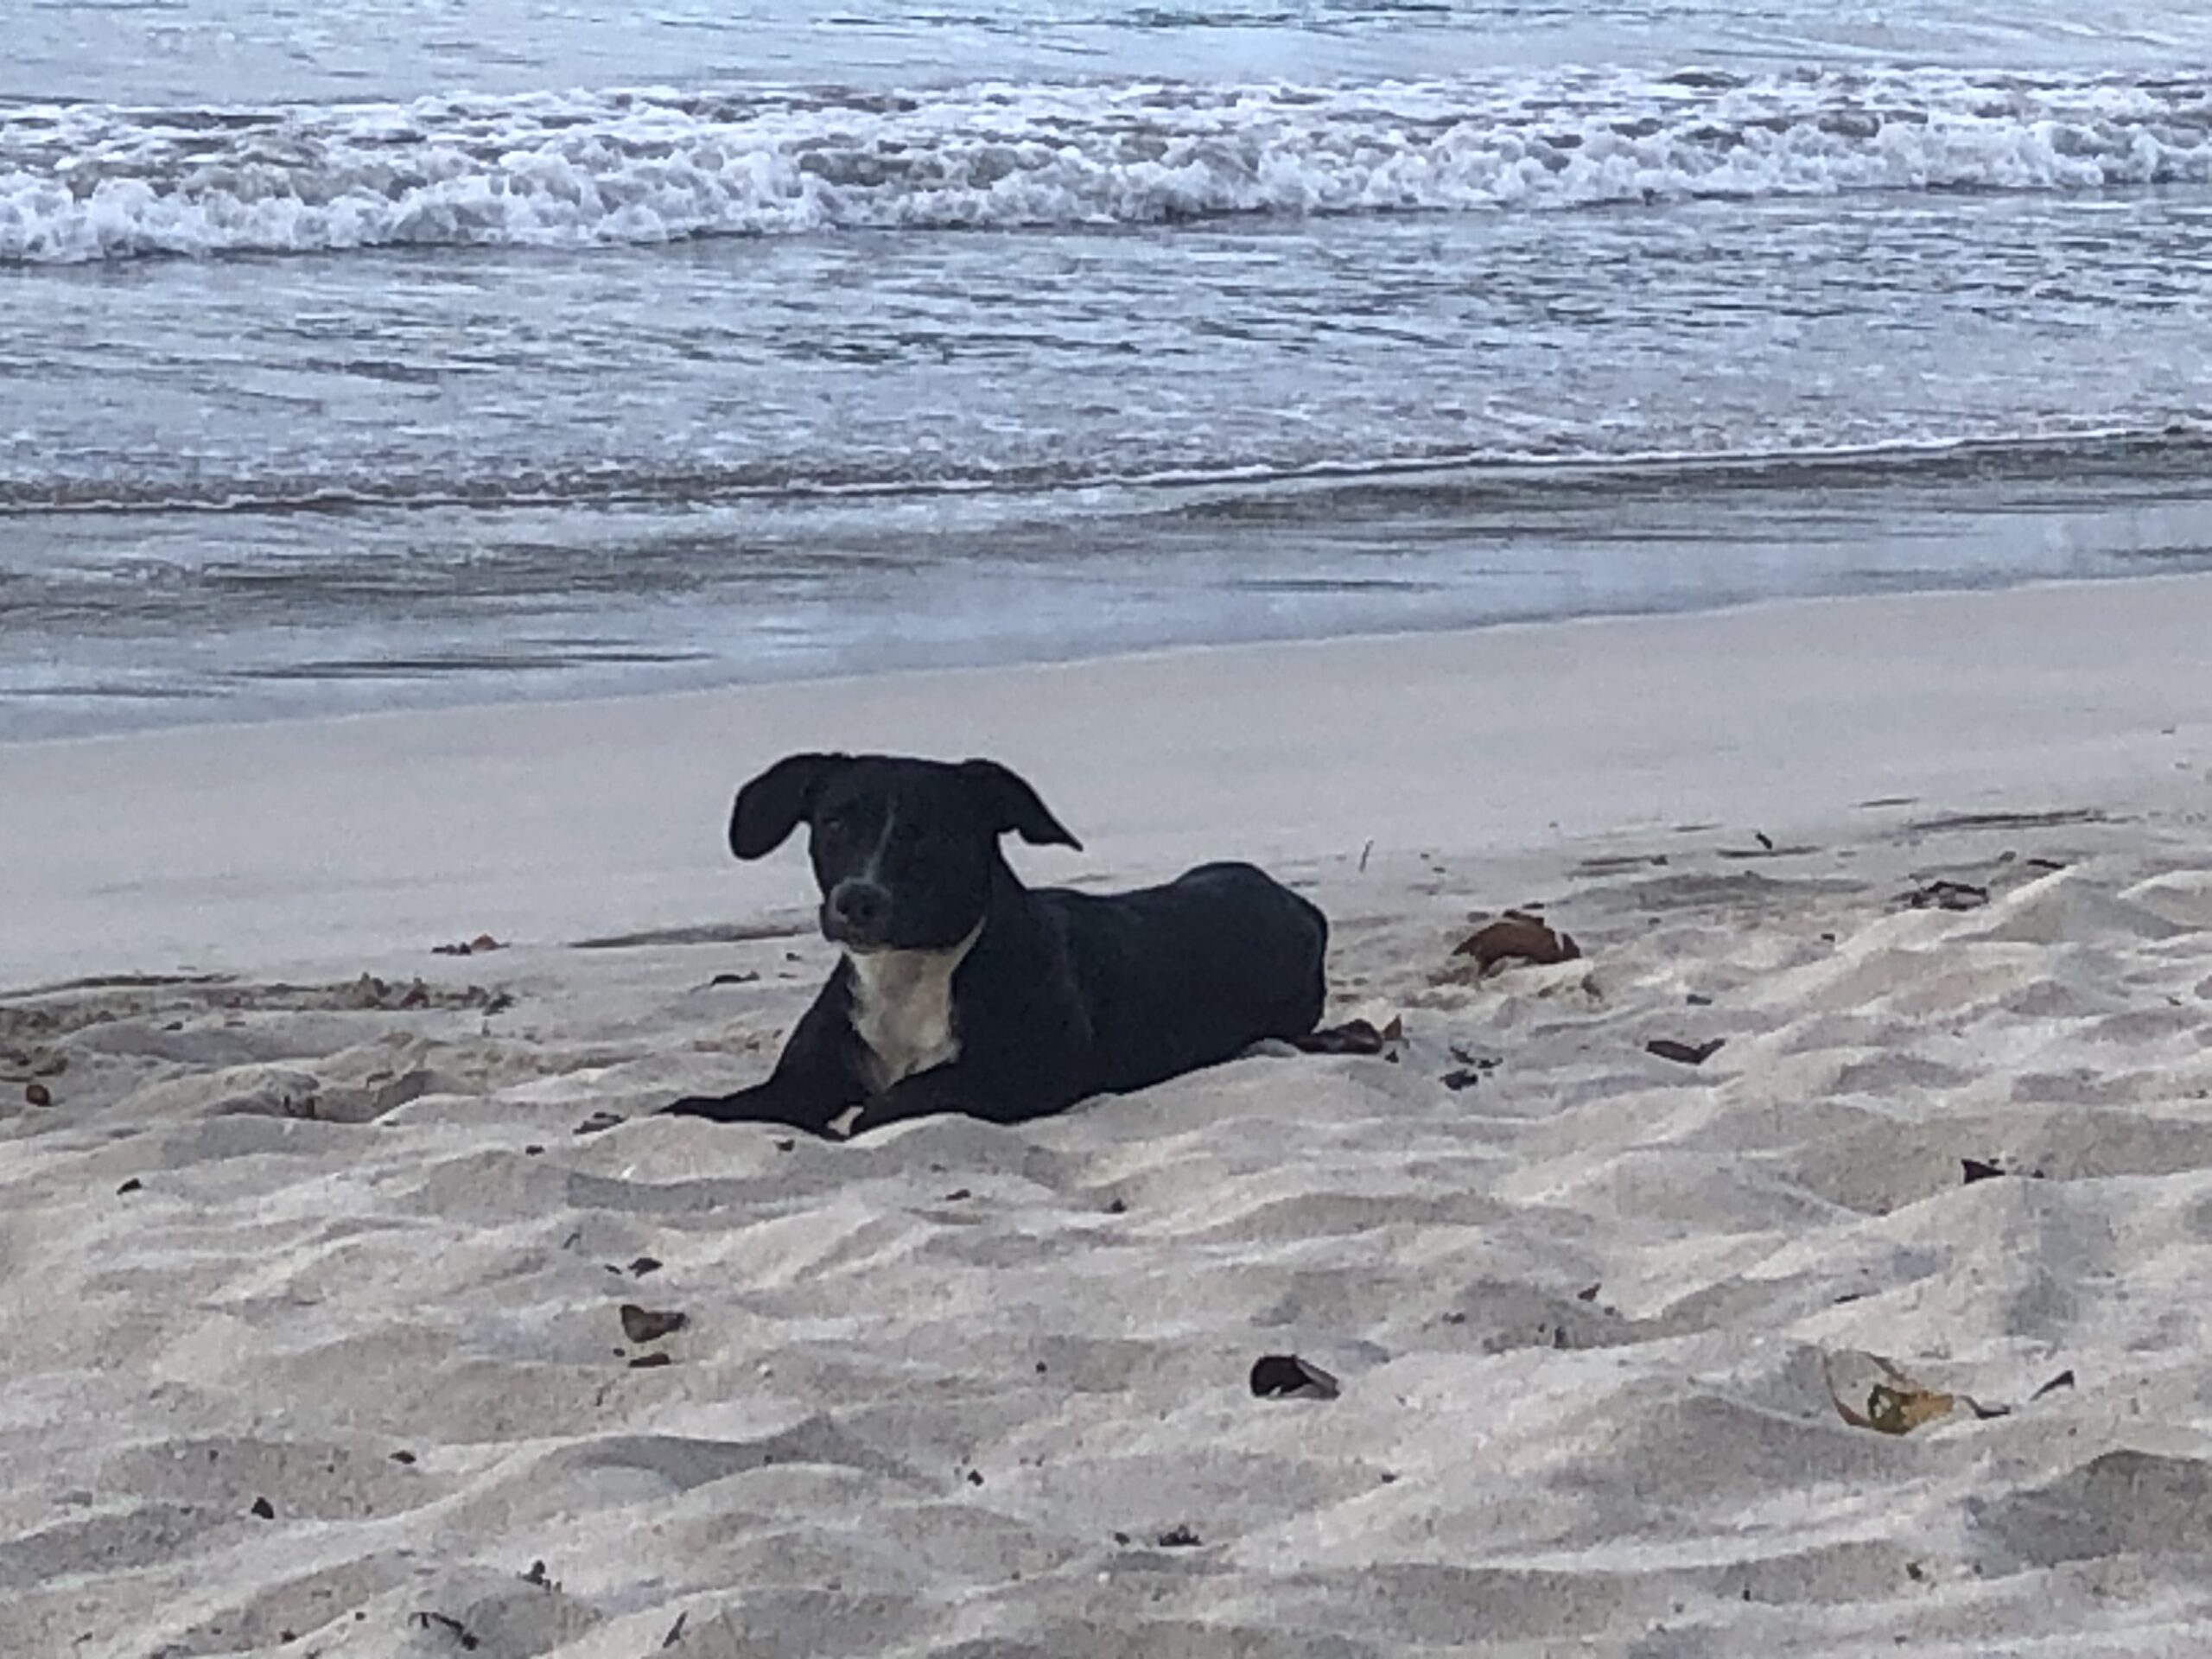 One of the stray dogs making its home at Magens Bay beach. The Humane Society of St. Thomas is working to capture the dogs, which are extremely wary of people. (Source photo by Sian Cobb)